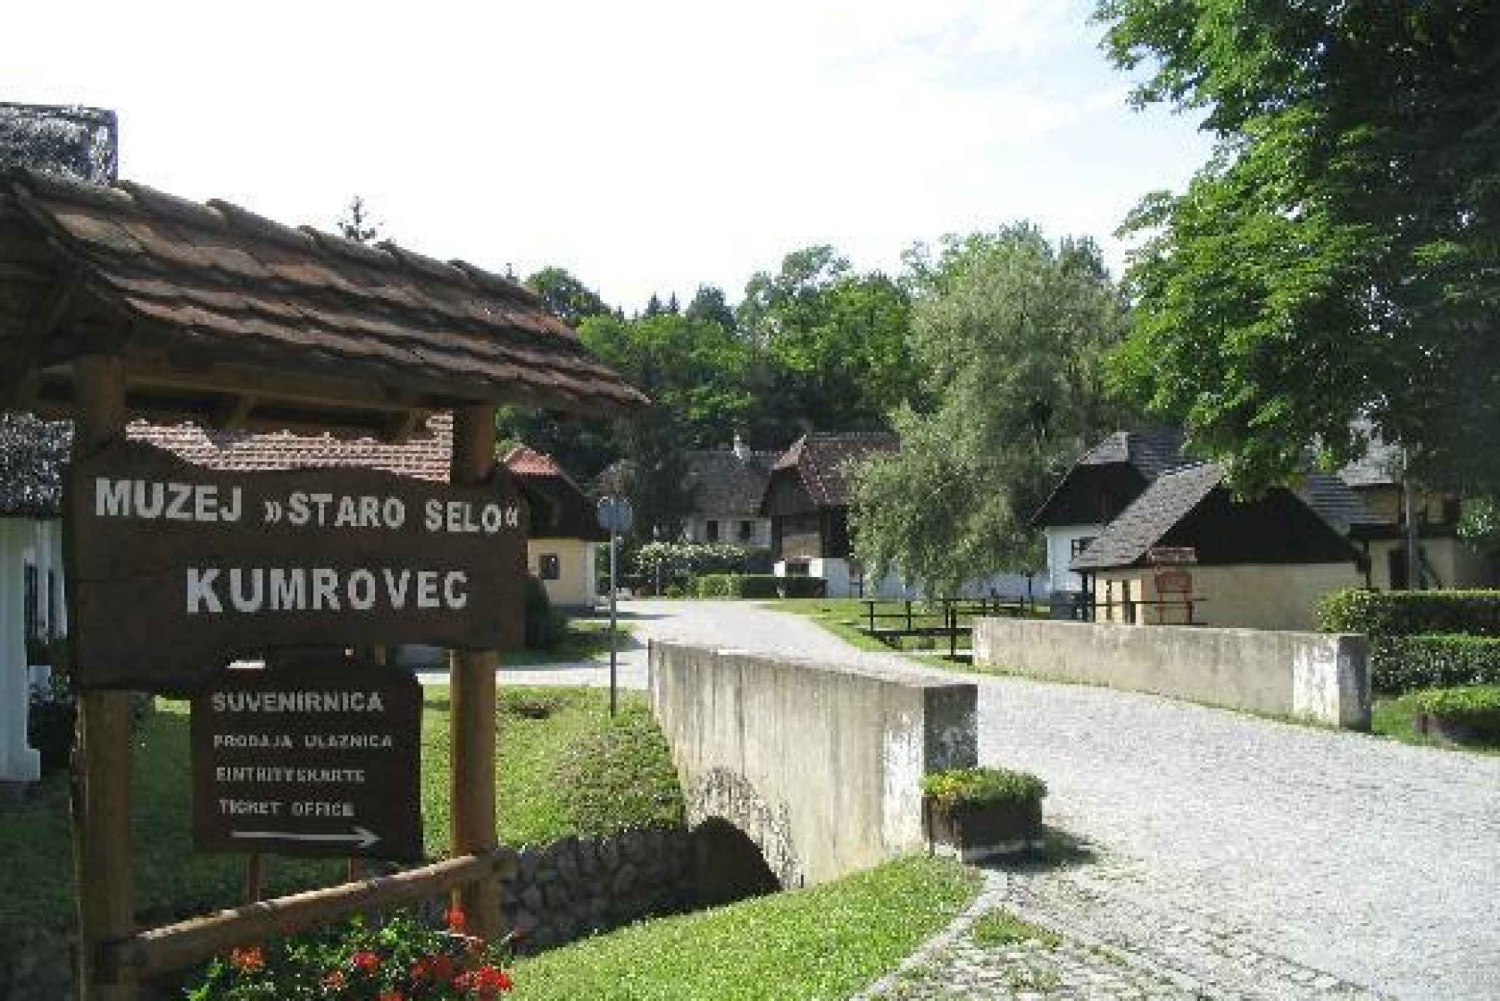 Private Tour to Kumrovec from Zagreb